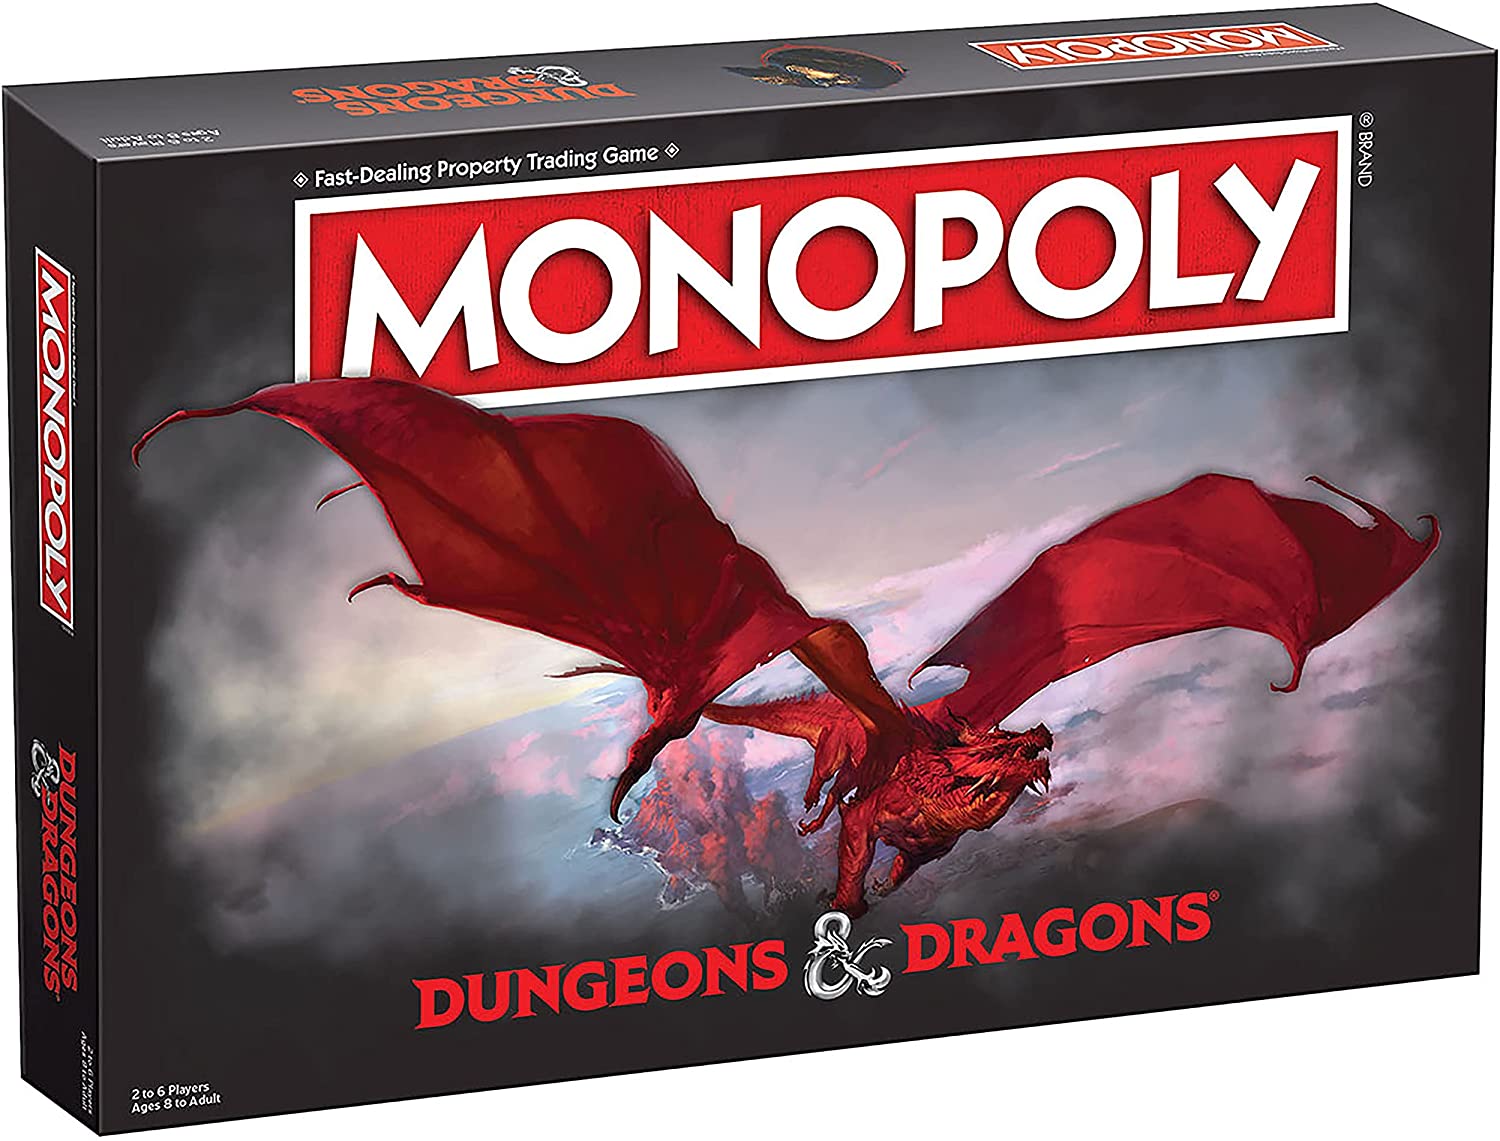 MONOPOLY - DUNGEONS AND DRAGONS